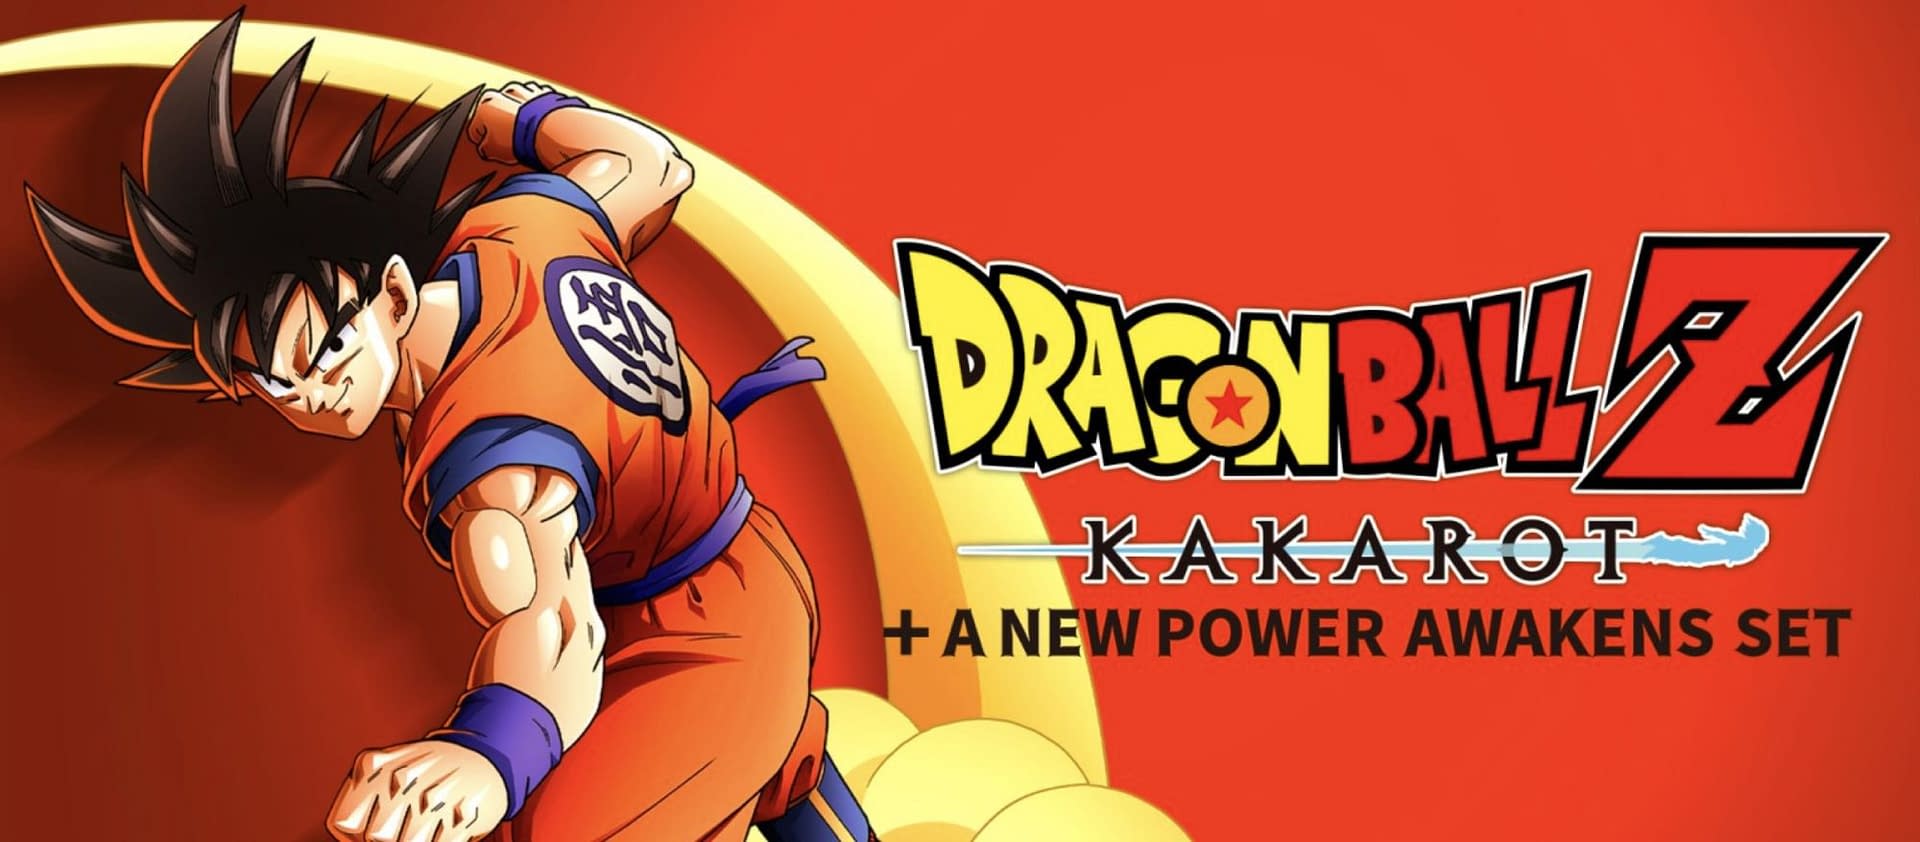 Review: 'Dragon Ball Z: Kakarot' captures anime warts and all